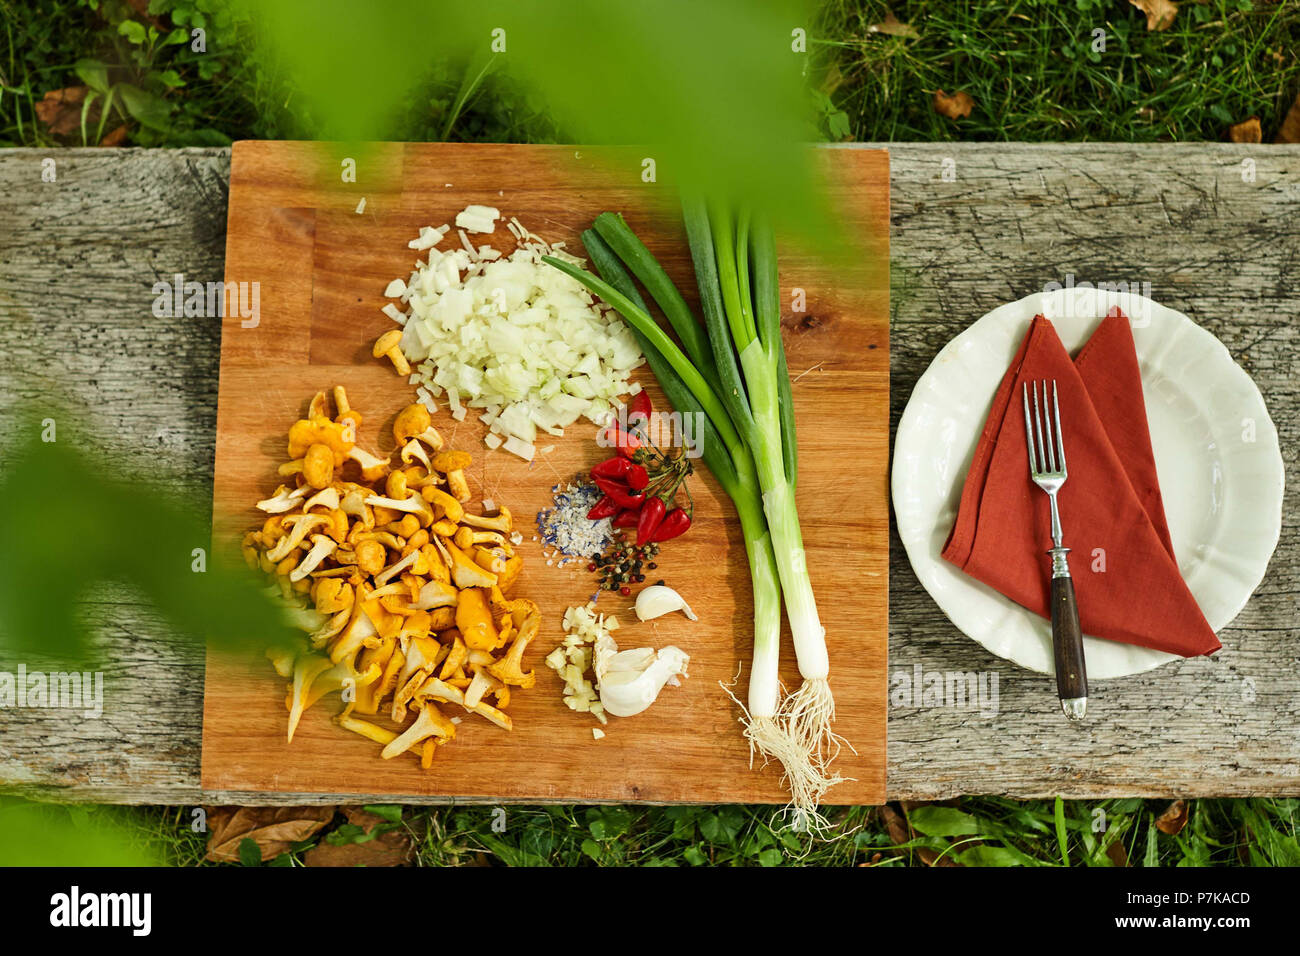 different ingredients on a wooden board, outside Stock Photo